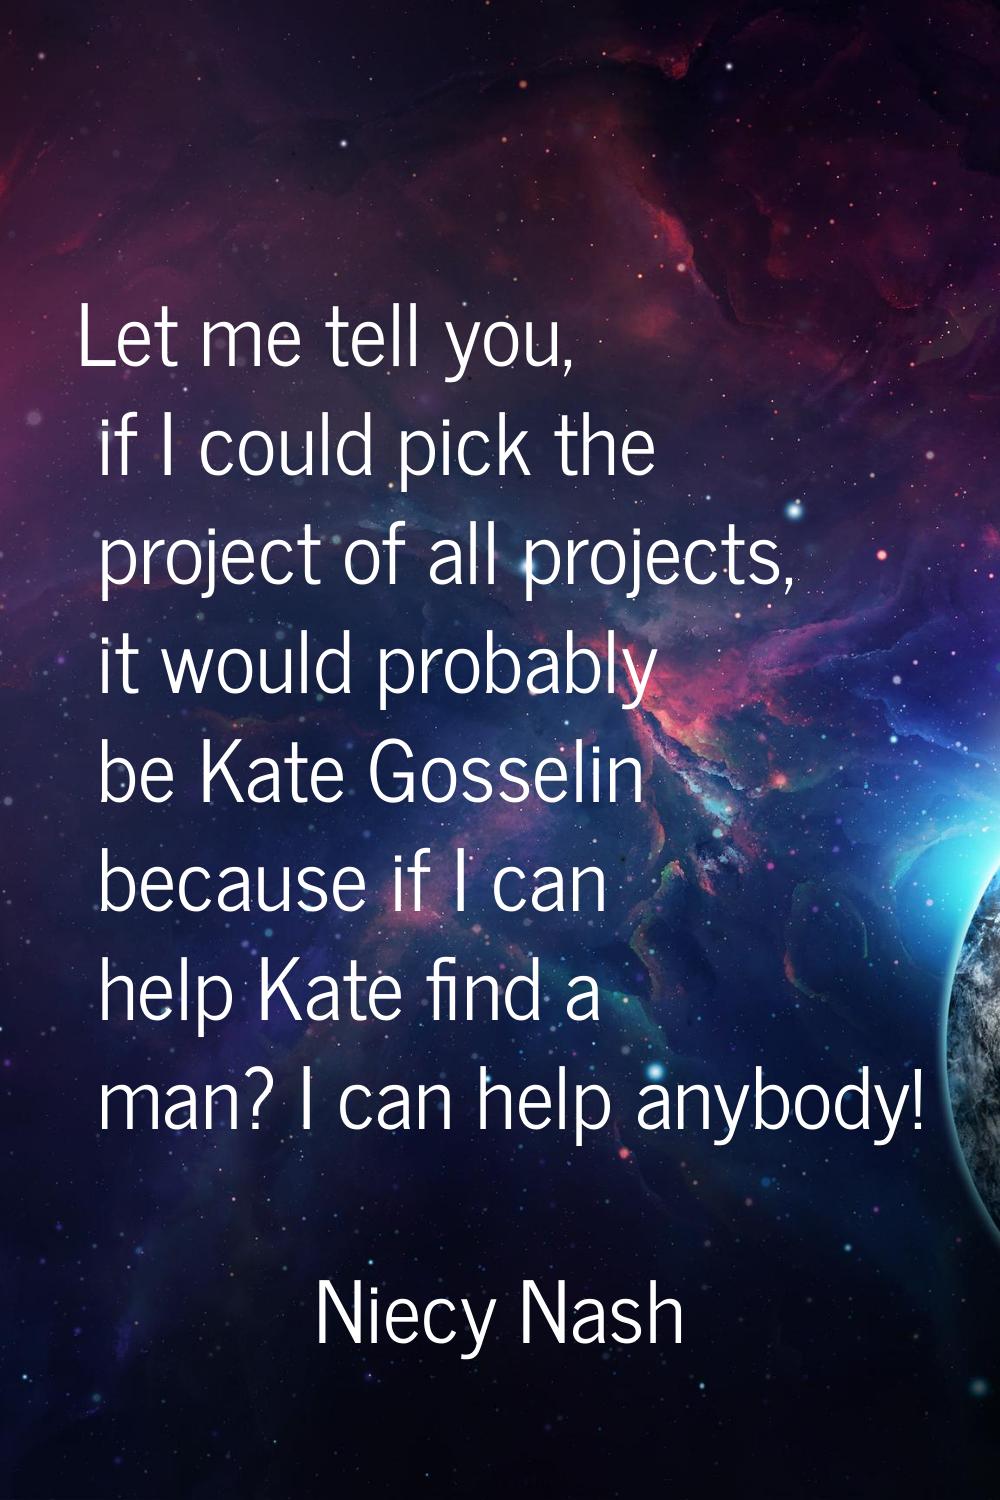 Let me tell you, if I could pick the project of all projects, it would probably be Kate Gosselin be